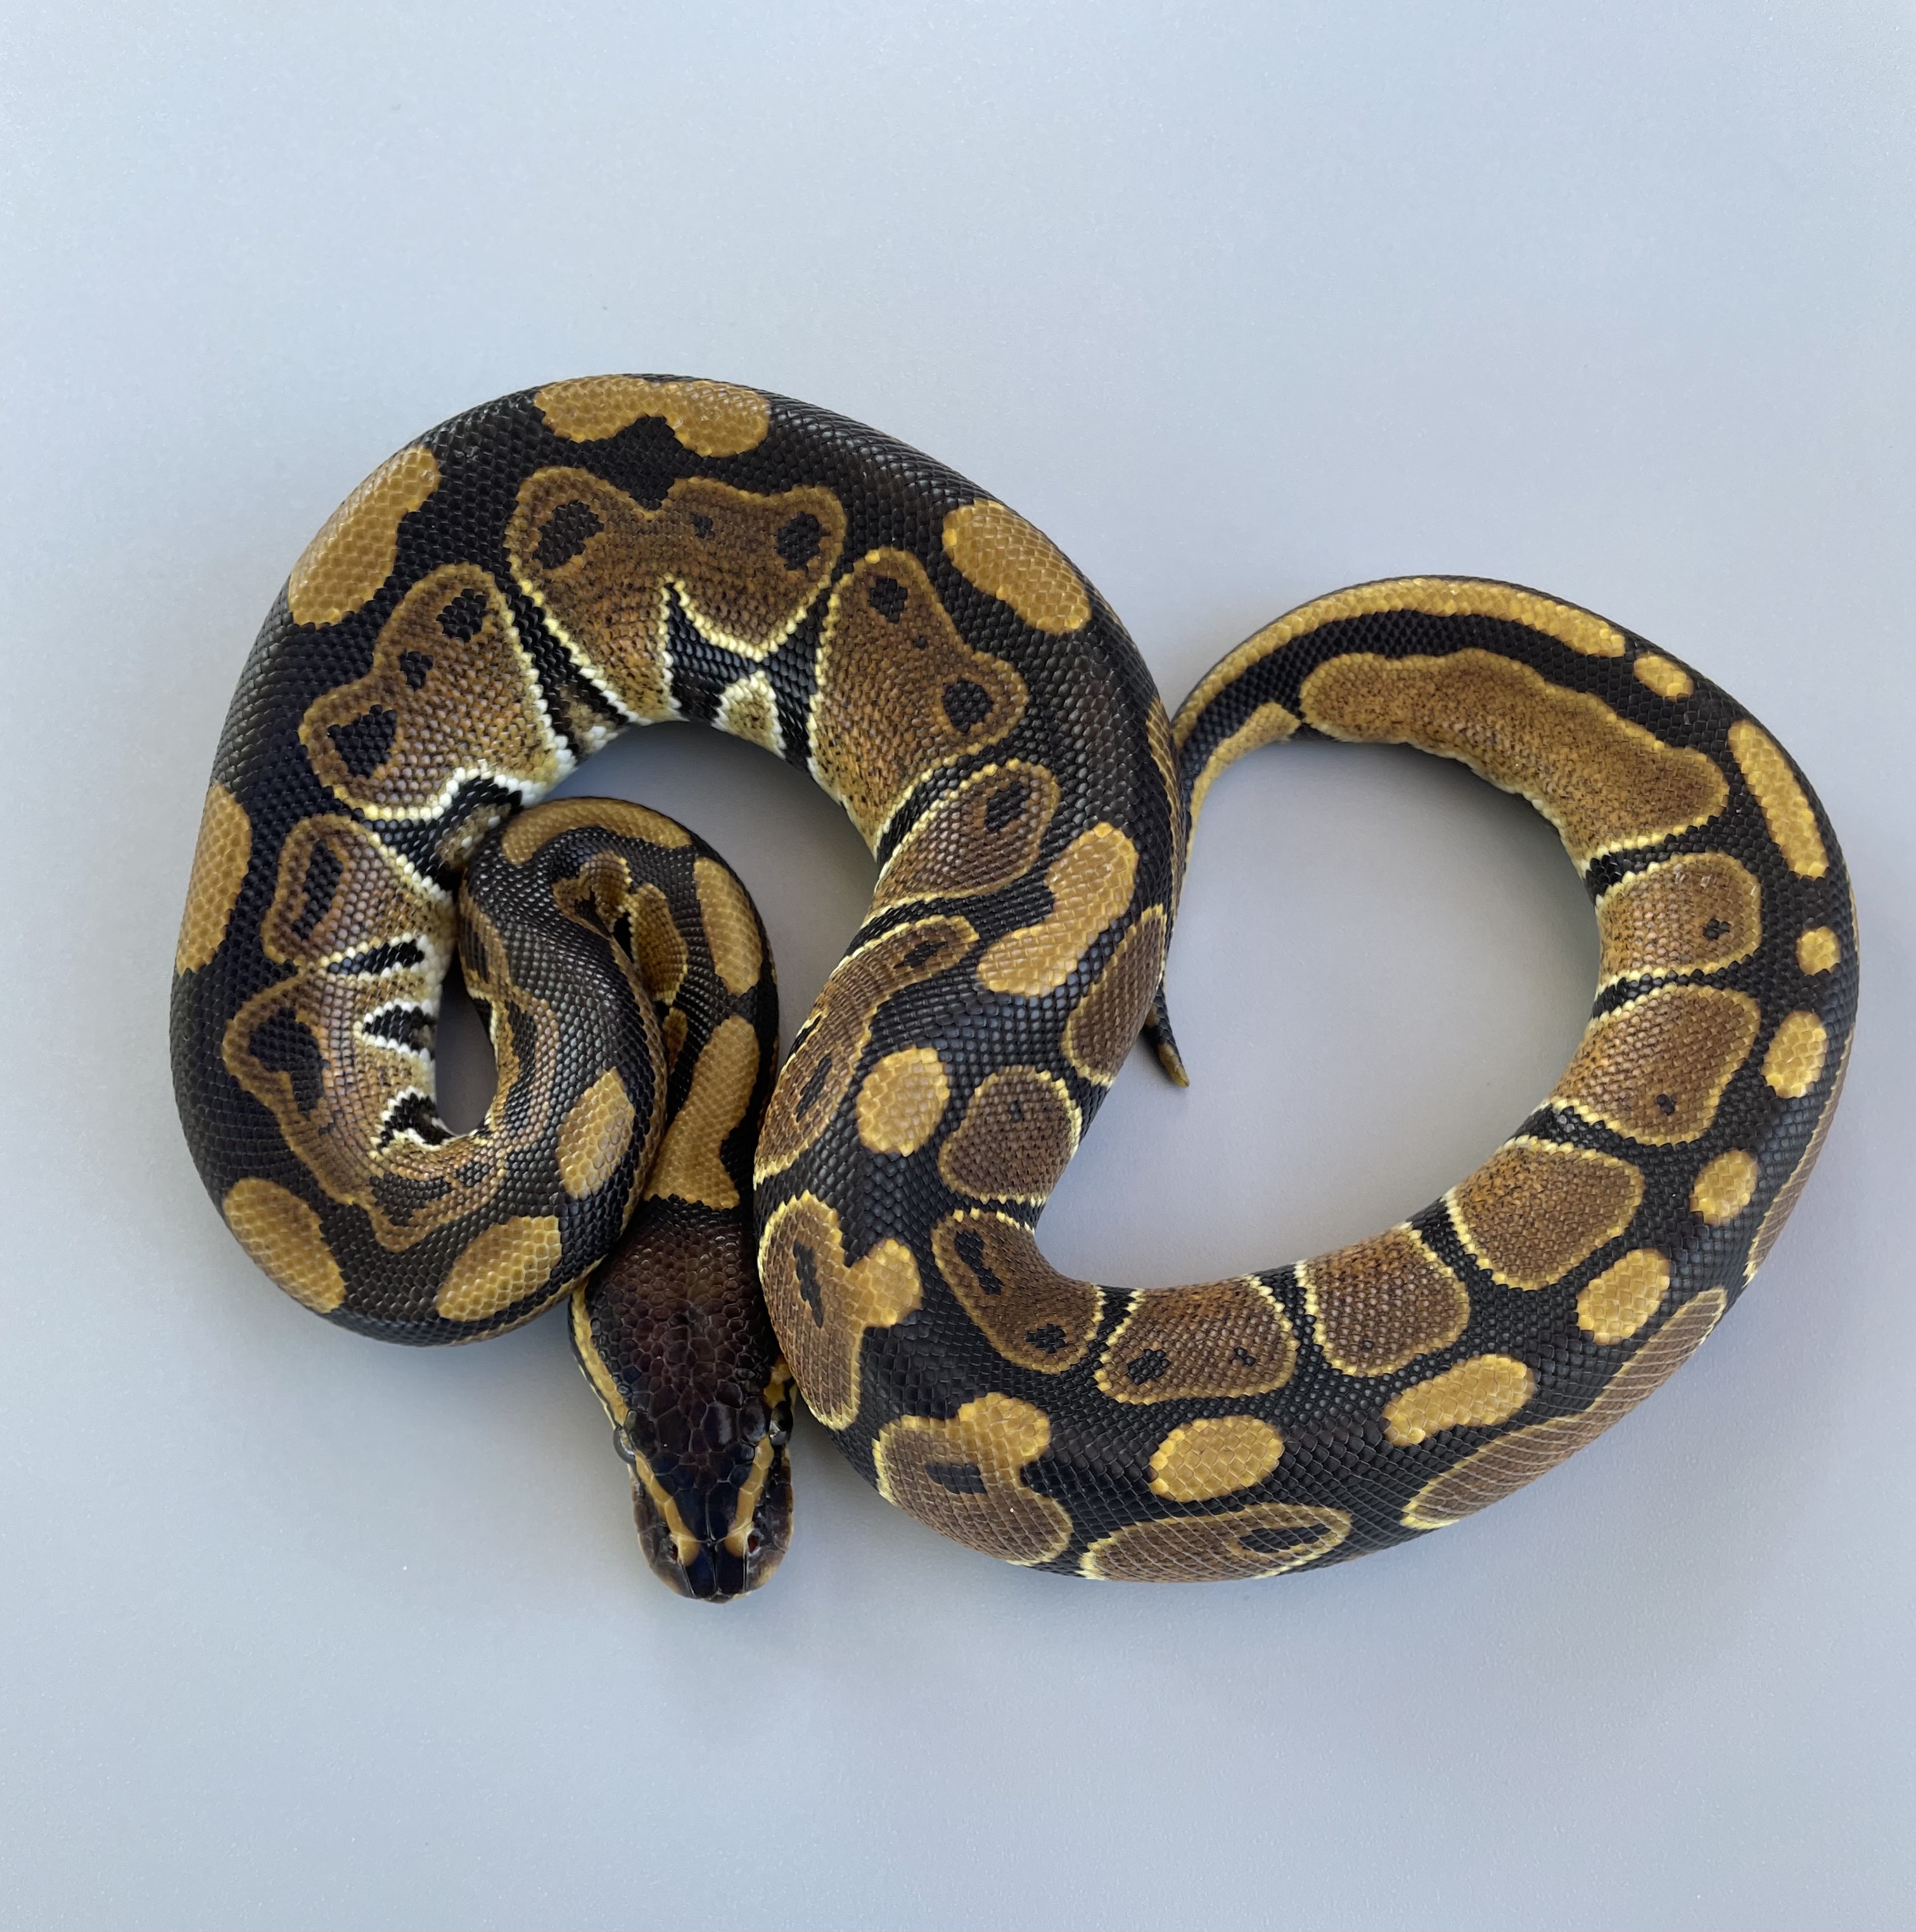 Genetic Black Back Ball Python by Ball or Nothing Pythons